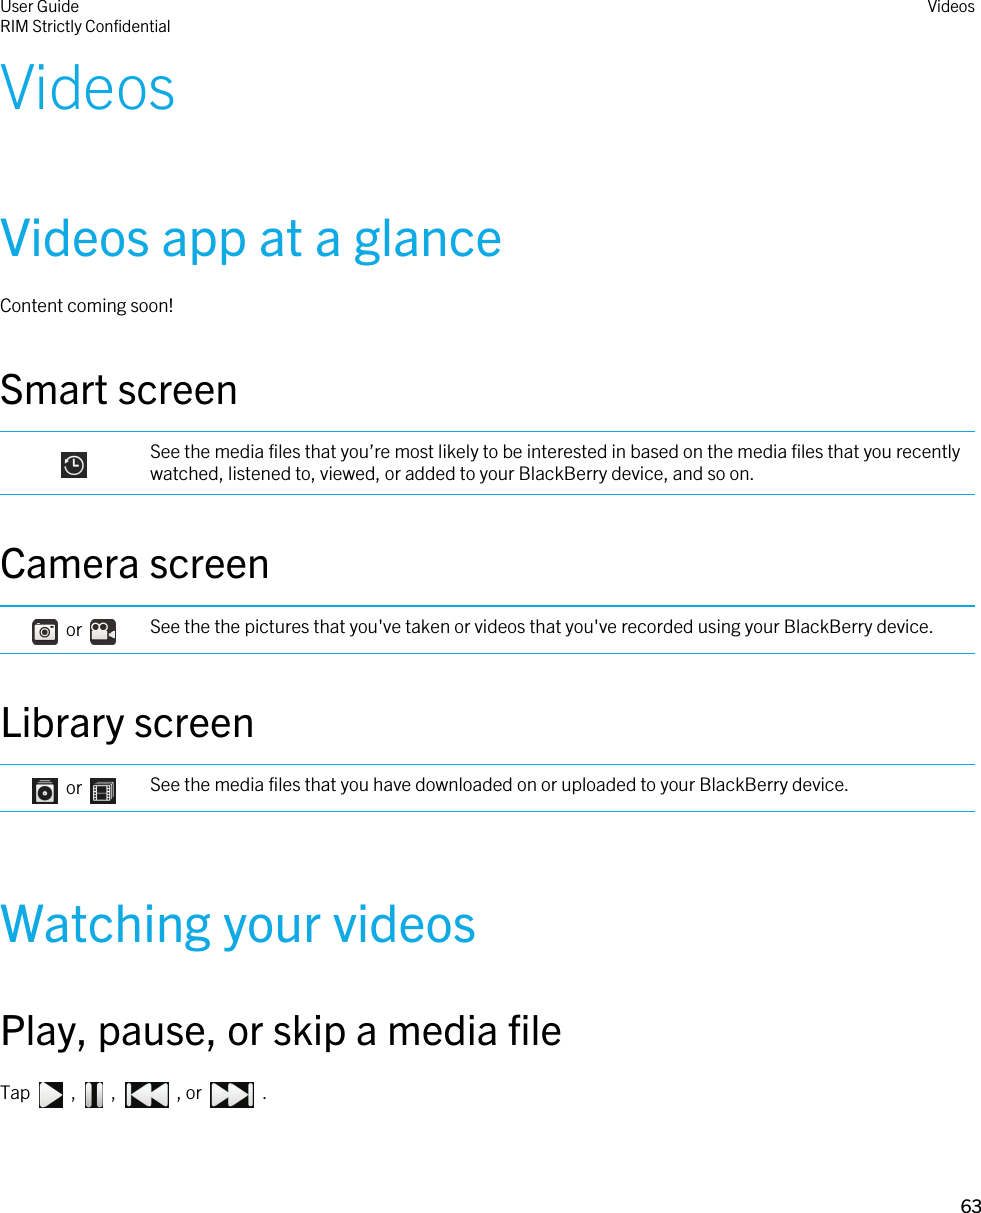 VideosVideos app at a glanceContent coming soon!Smart screen See the media files that you’re most likely to be interested in based on the media files that you recently watched, listened to, viewed, or added to your BlackBerry device, and so on.Camera screen    or  See the the pictures that you&apos;ve taken or videos that you&apos;ve recorded using your BlackBerry device.Library screen    or  See the media files that you have downloaded on or uploaded to your BlackBerry device.Watching your videosPlay, pause, or skip a media fileTap    ,    ,    , or    . User GuideRIM Strictly ConfidentialVideos63 